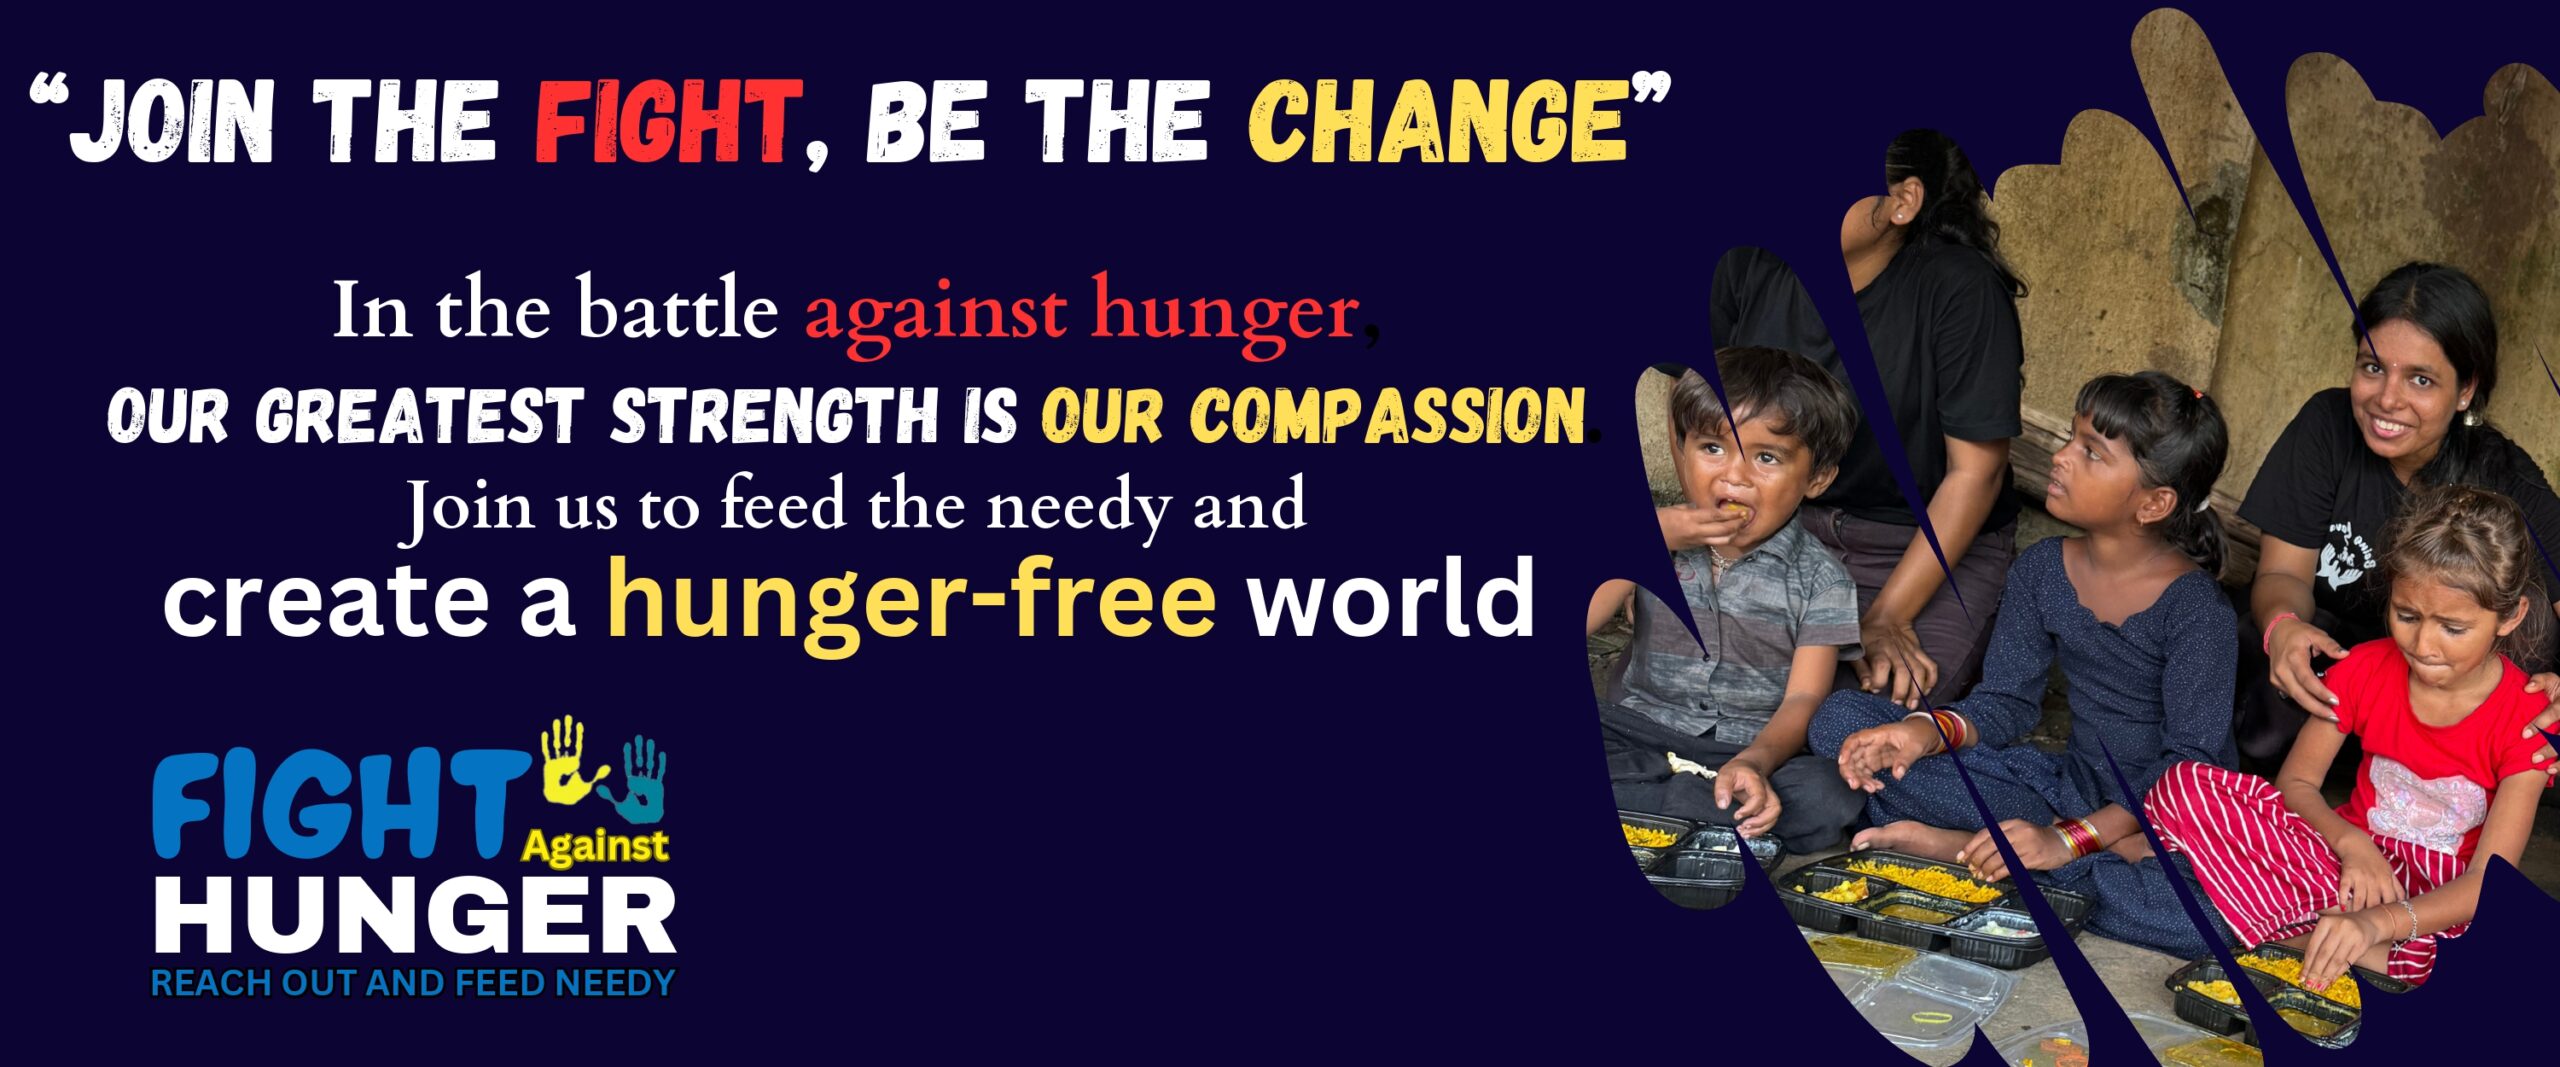 JOIN THE FIGHT, BE THE CHANGE